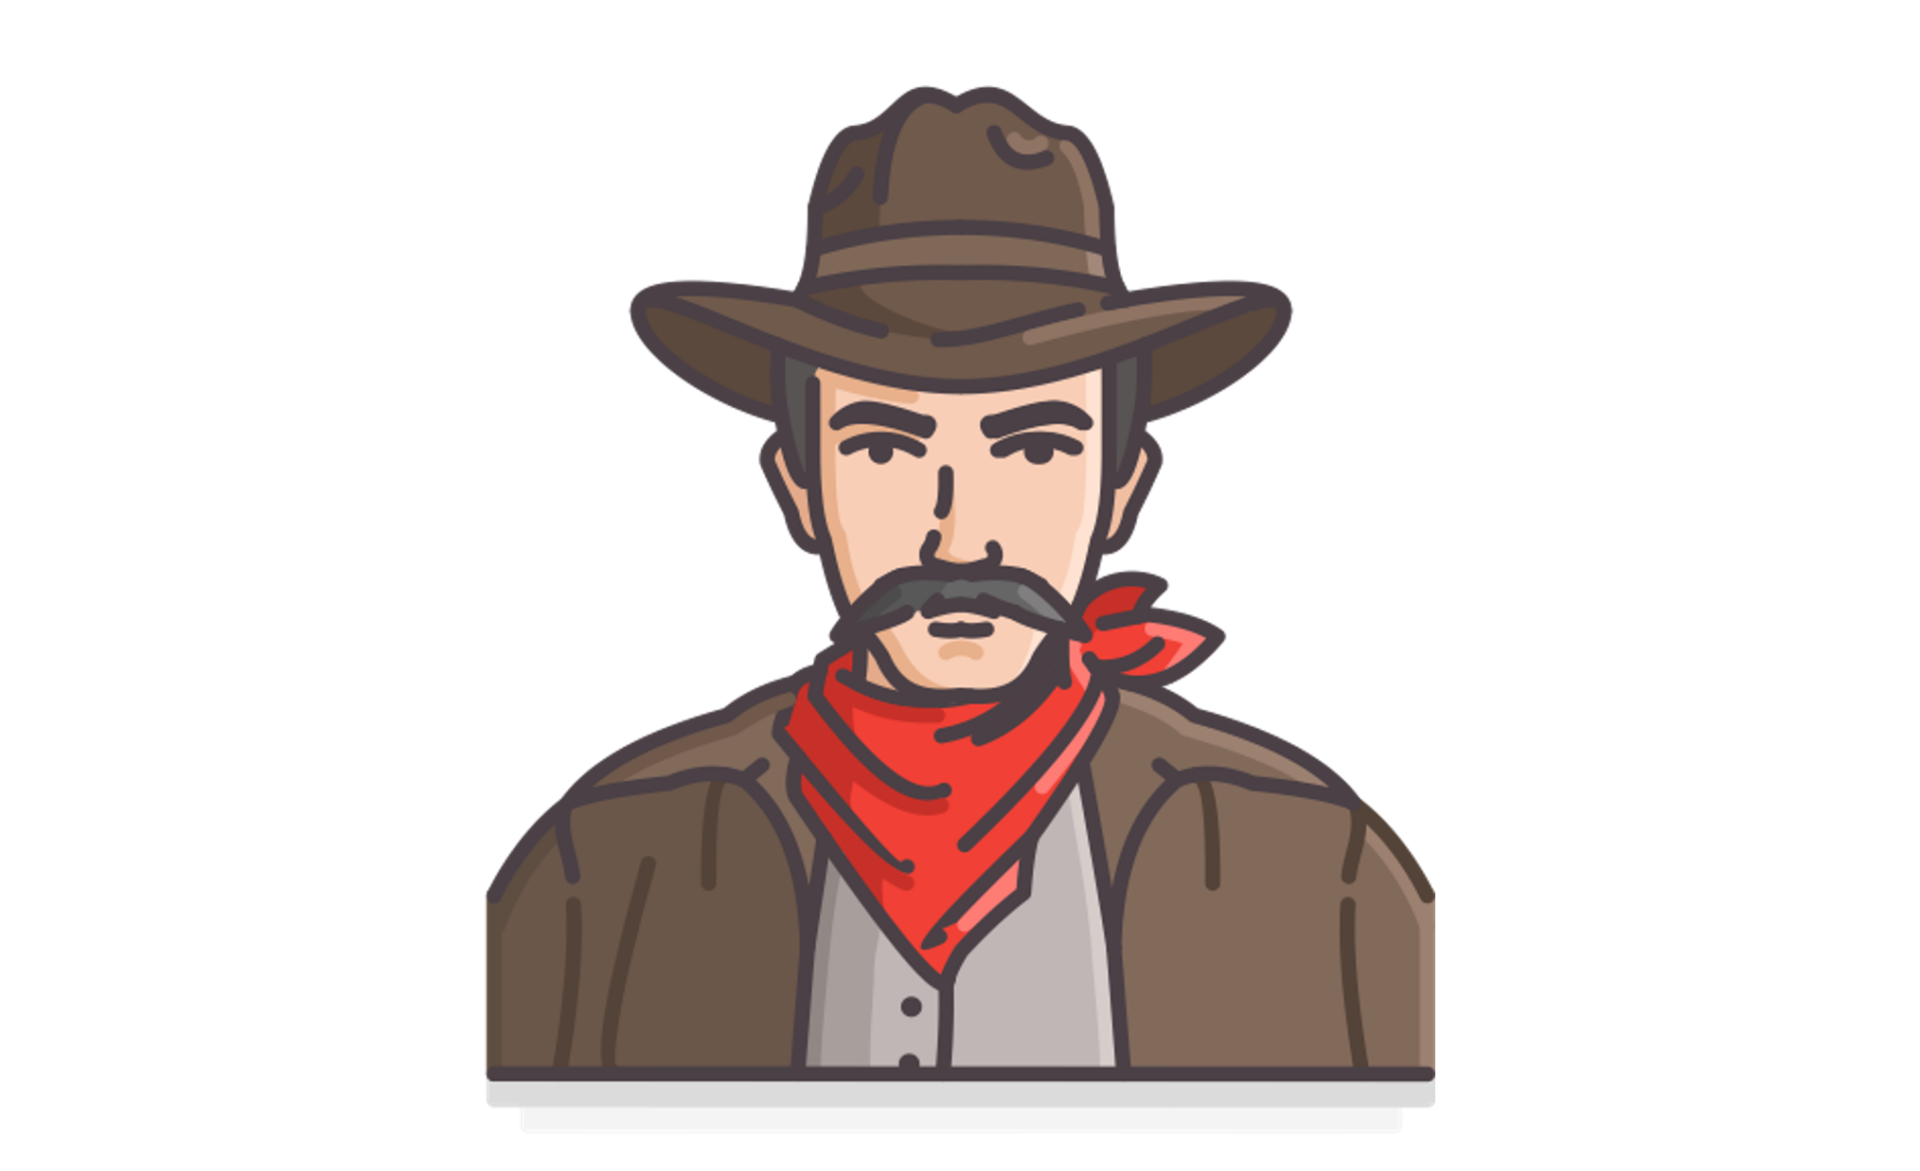 Icon of a cowboy with cowboy hat, mustache, and red bandana